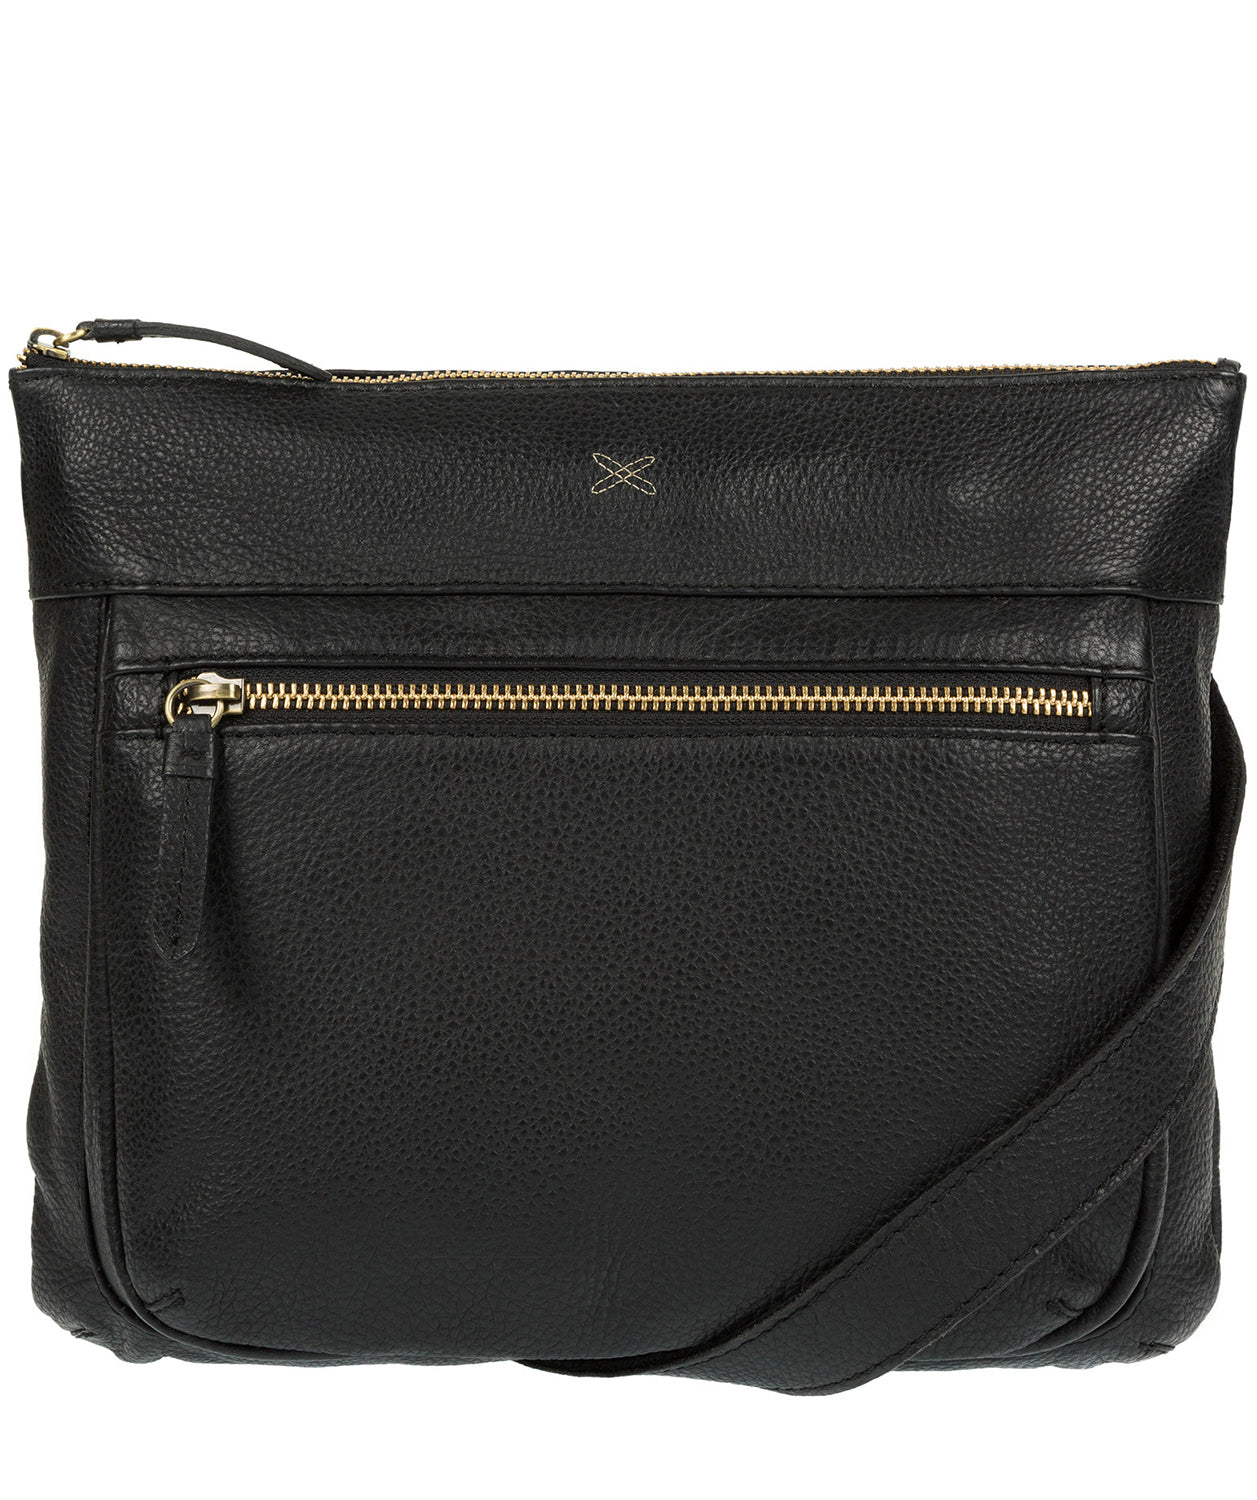 Black Leather Crossbody Bag 'Victoria' by Made By Stitch – Pure ...